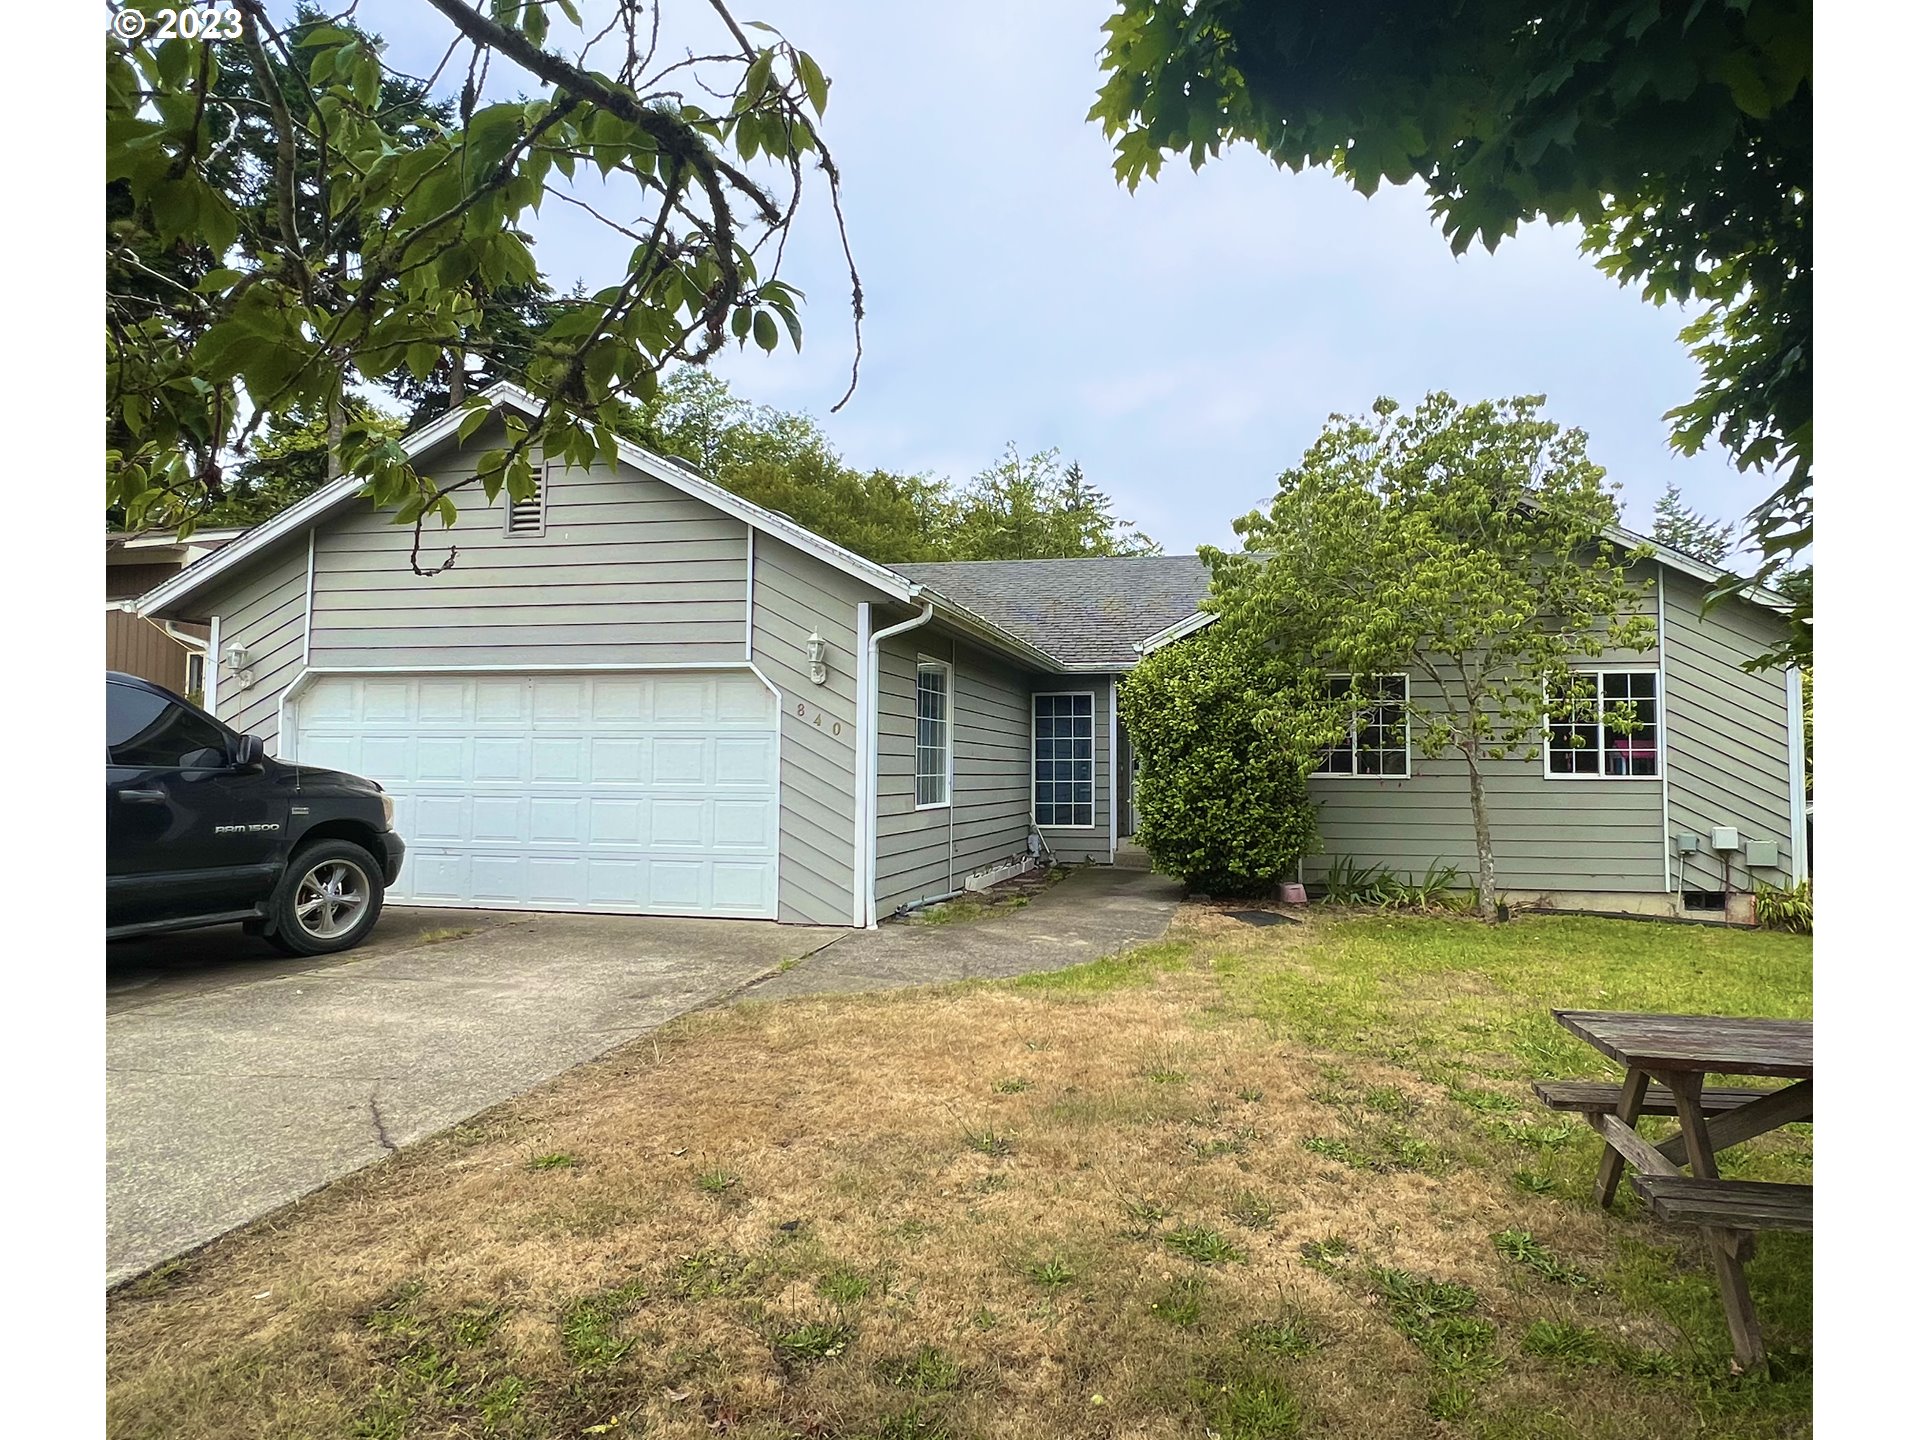 840 SEABREEZE TER, Coos Bay, OR 